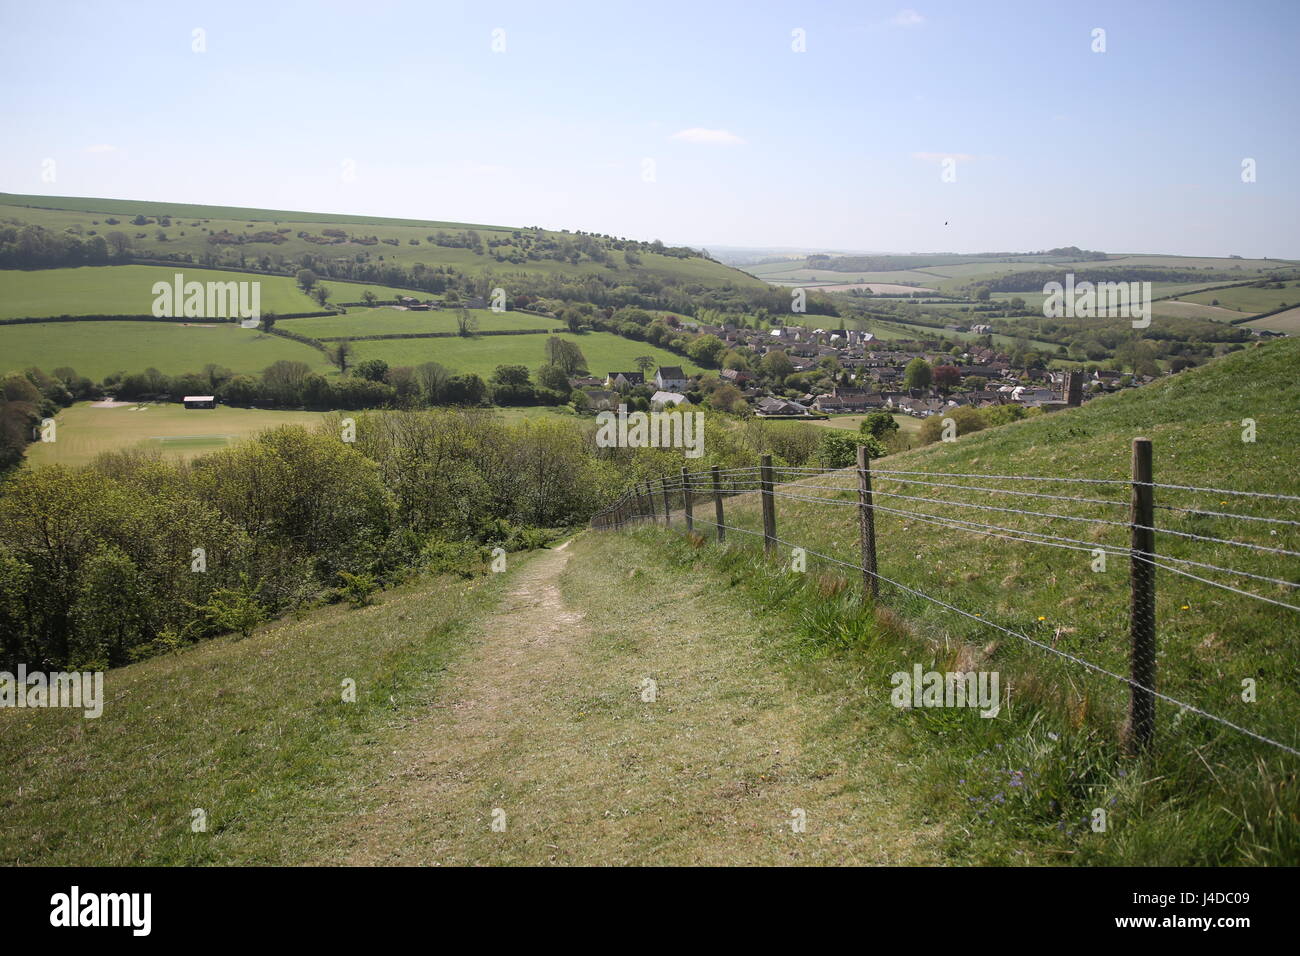 Looking down from a hill and along a footpath to the scenic and historic village of Cerne Abbas in Dorset, England Stock Photo